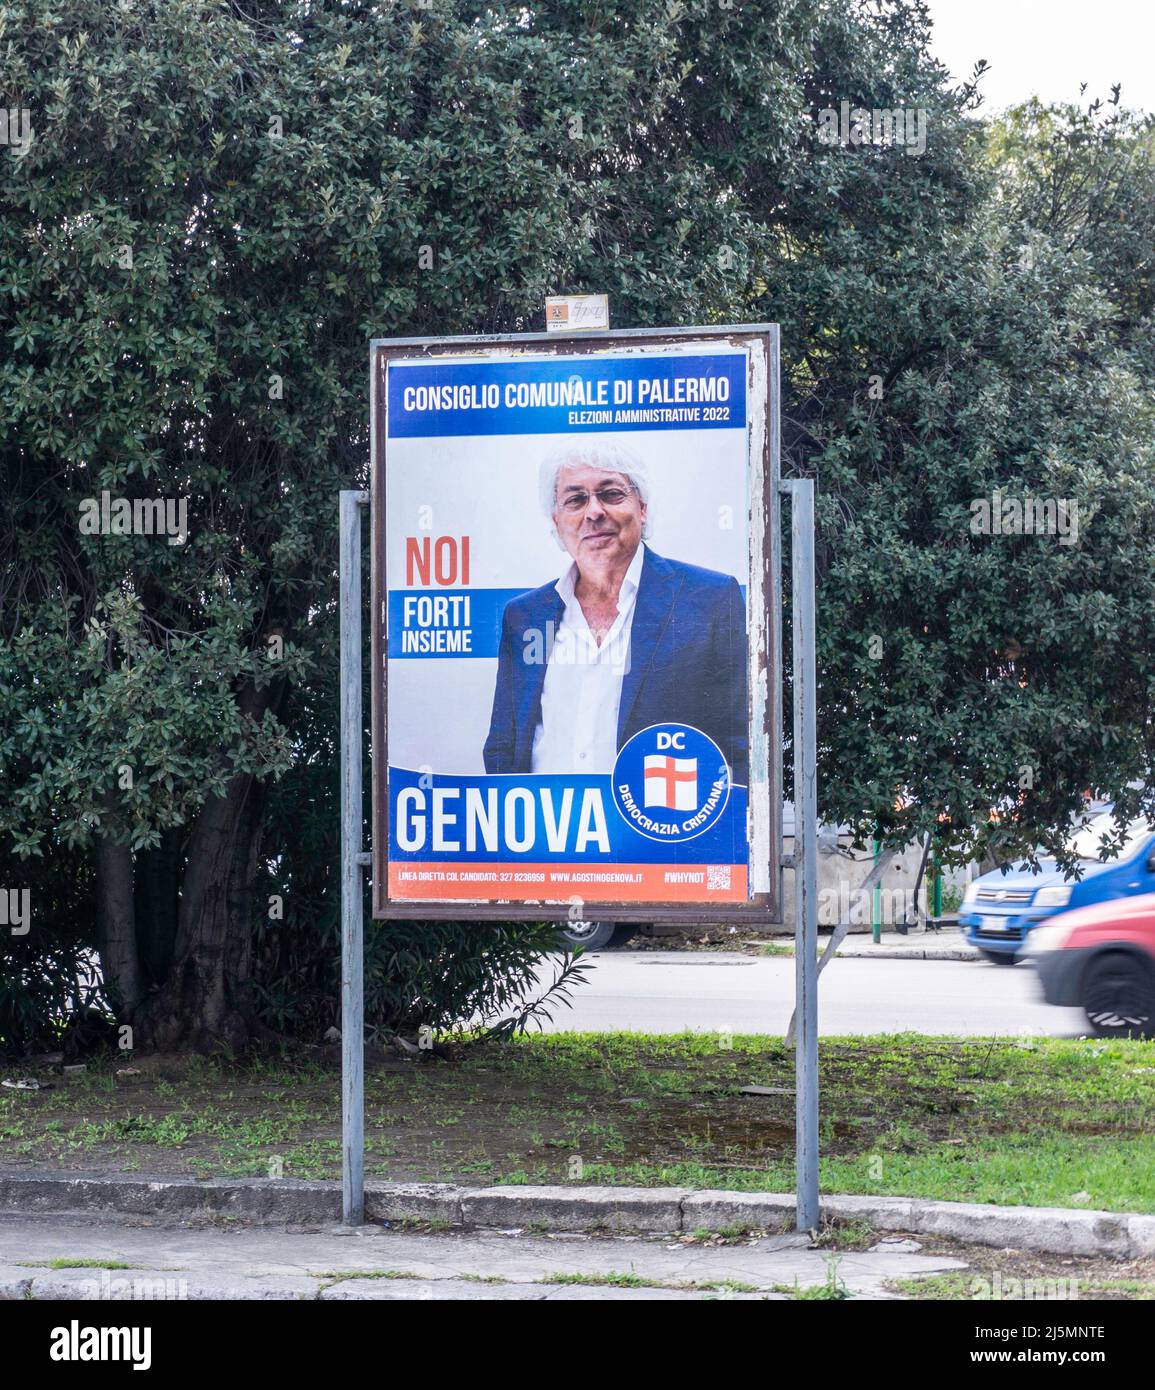 An election  poster for Agostino Genova a candidate for the 2022 city council elections in Palermo, Sicily, Italy. Stock Photo